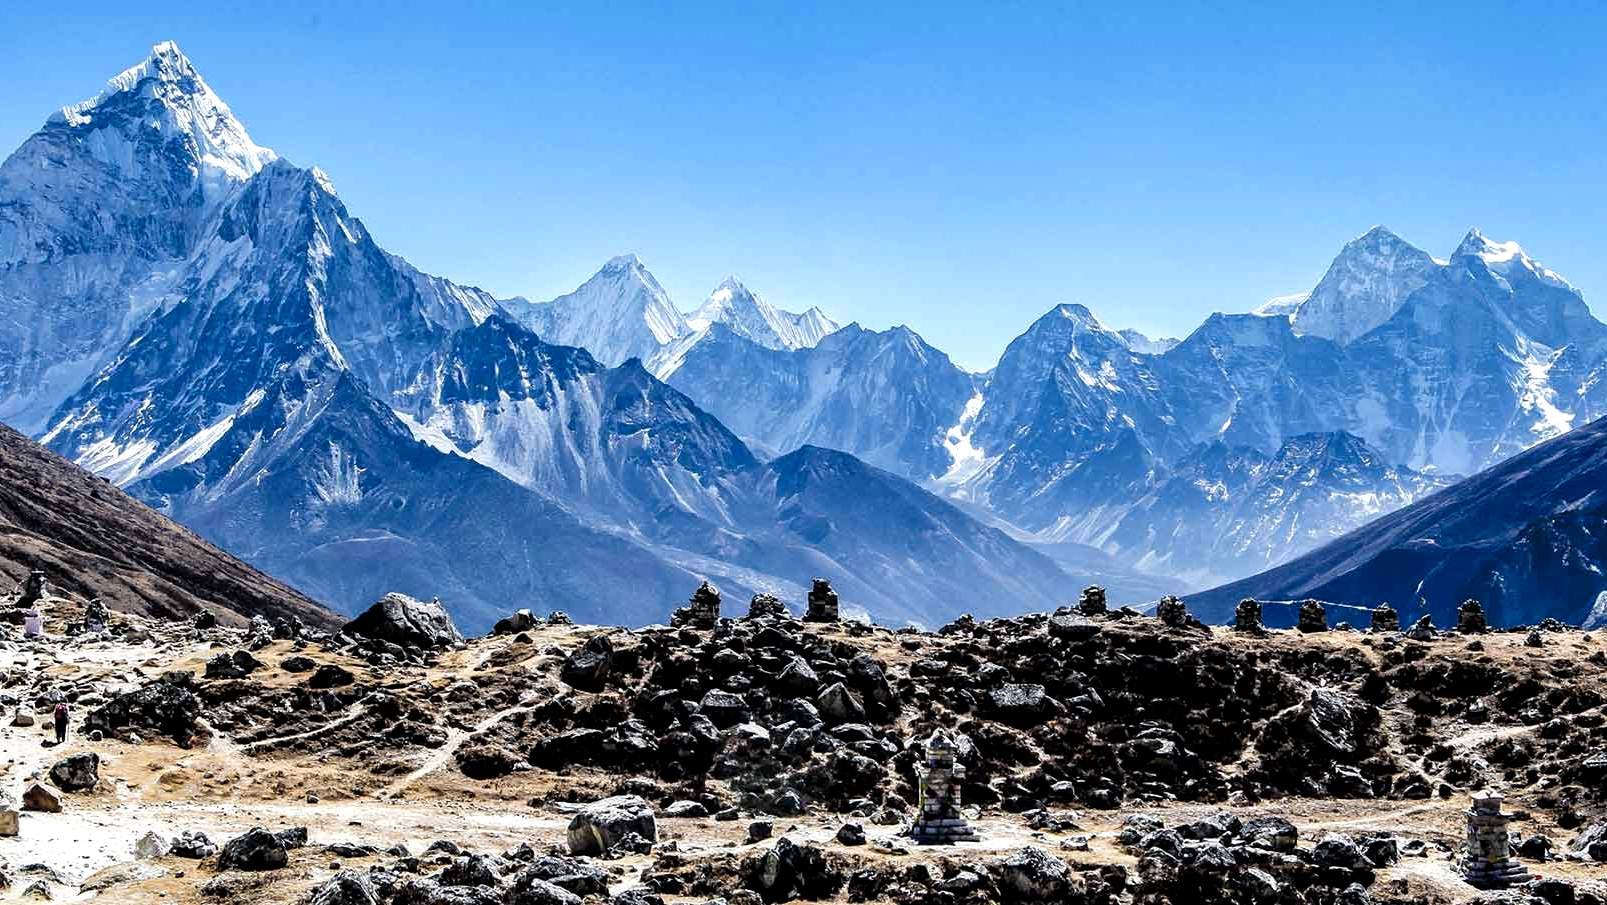 The flora and fauna of the Everest Region - A trekkers guide to wildlife